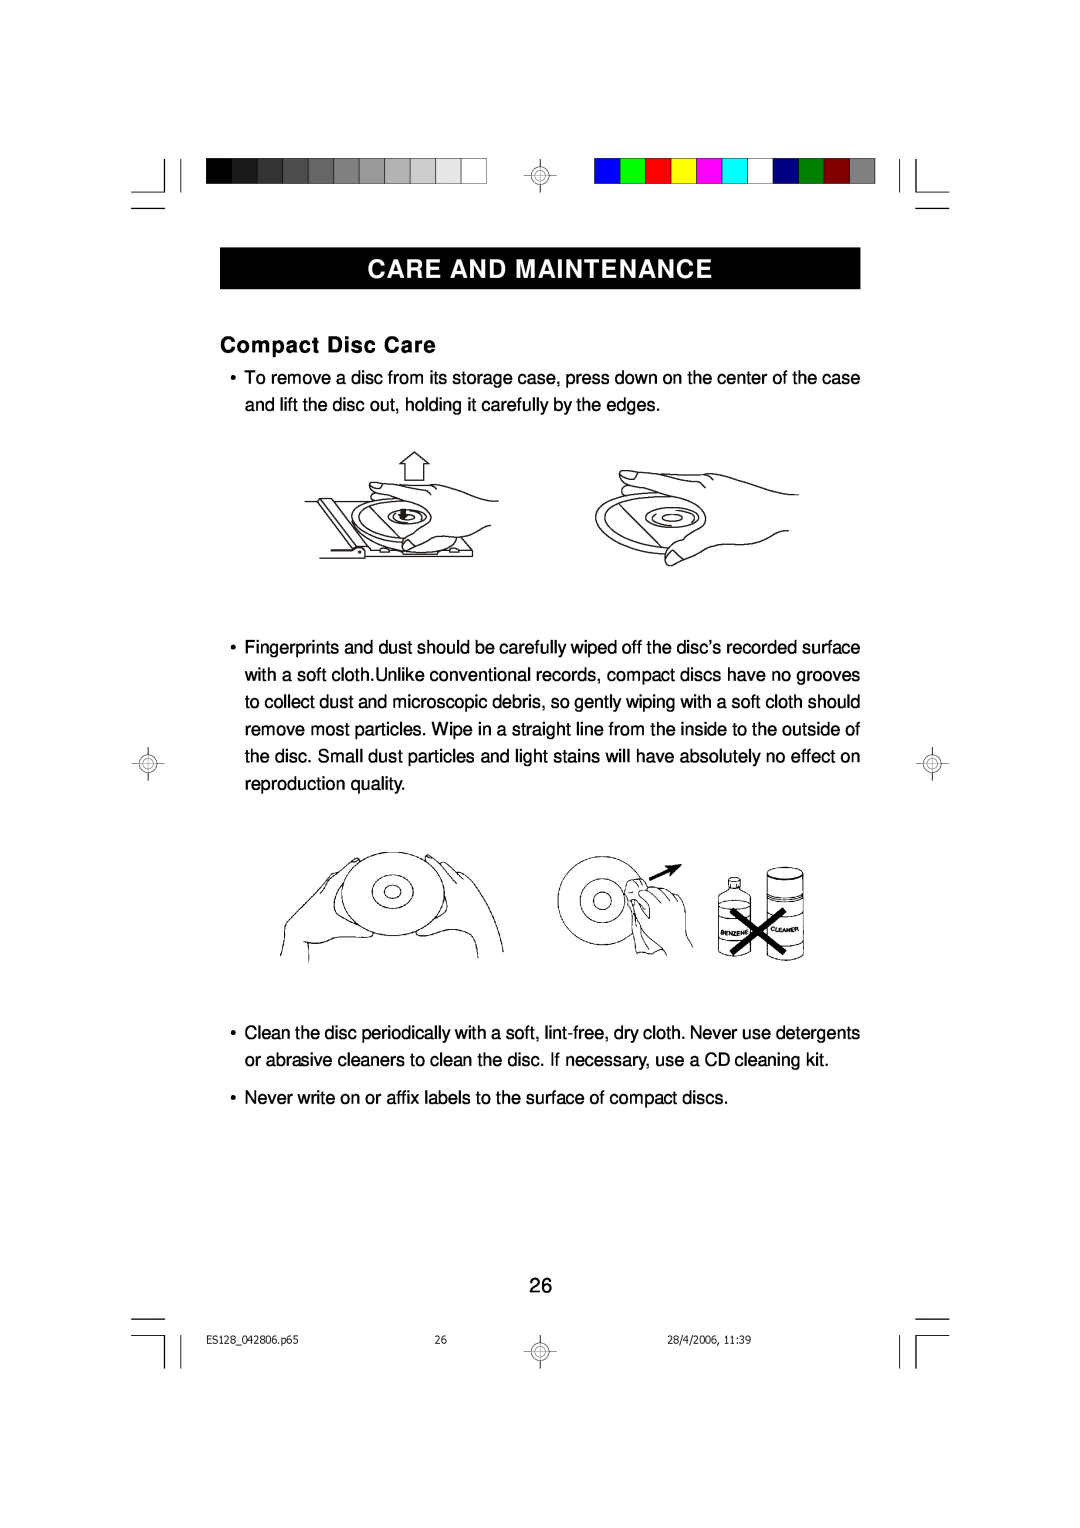 Emerson ES128 owner manual Care And Maintenance, Compact Disc Care 